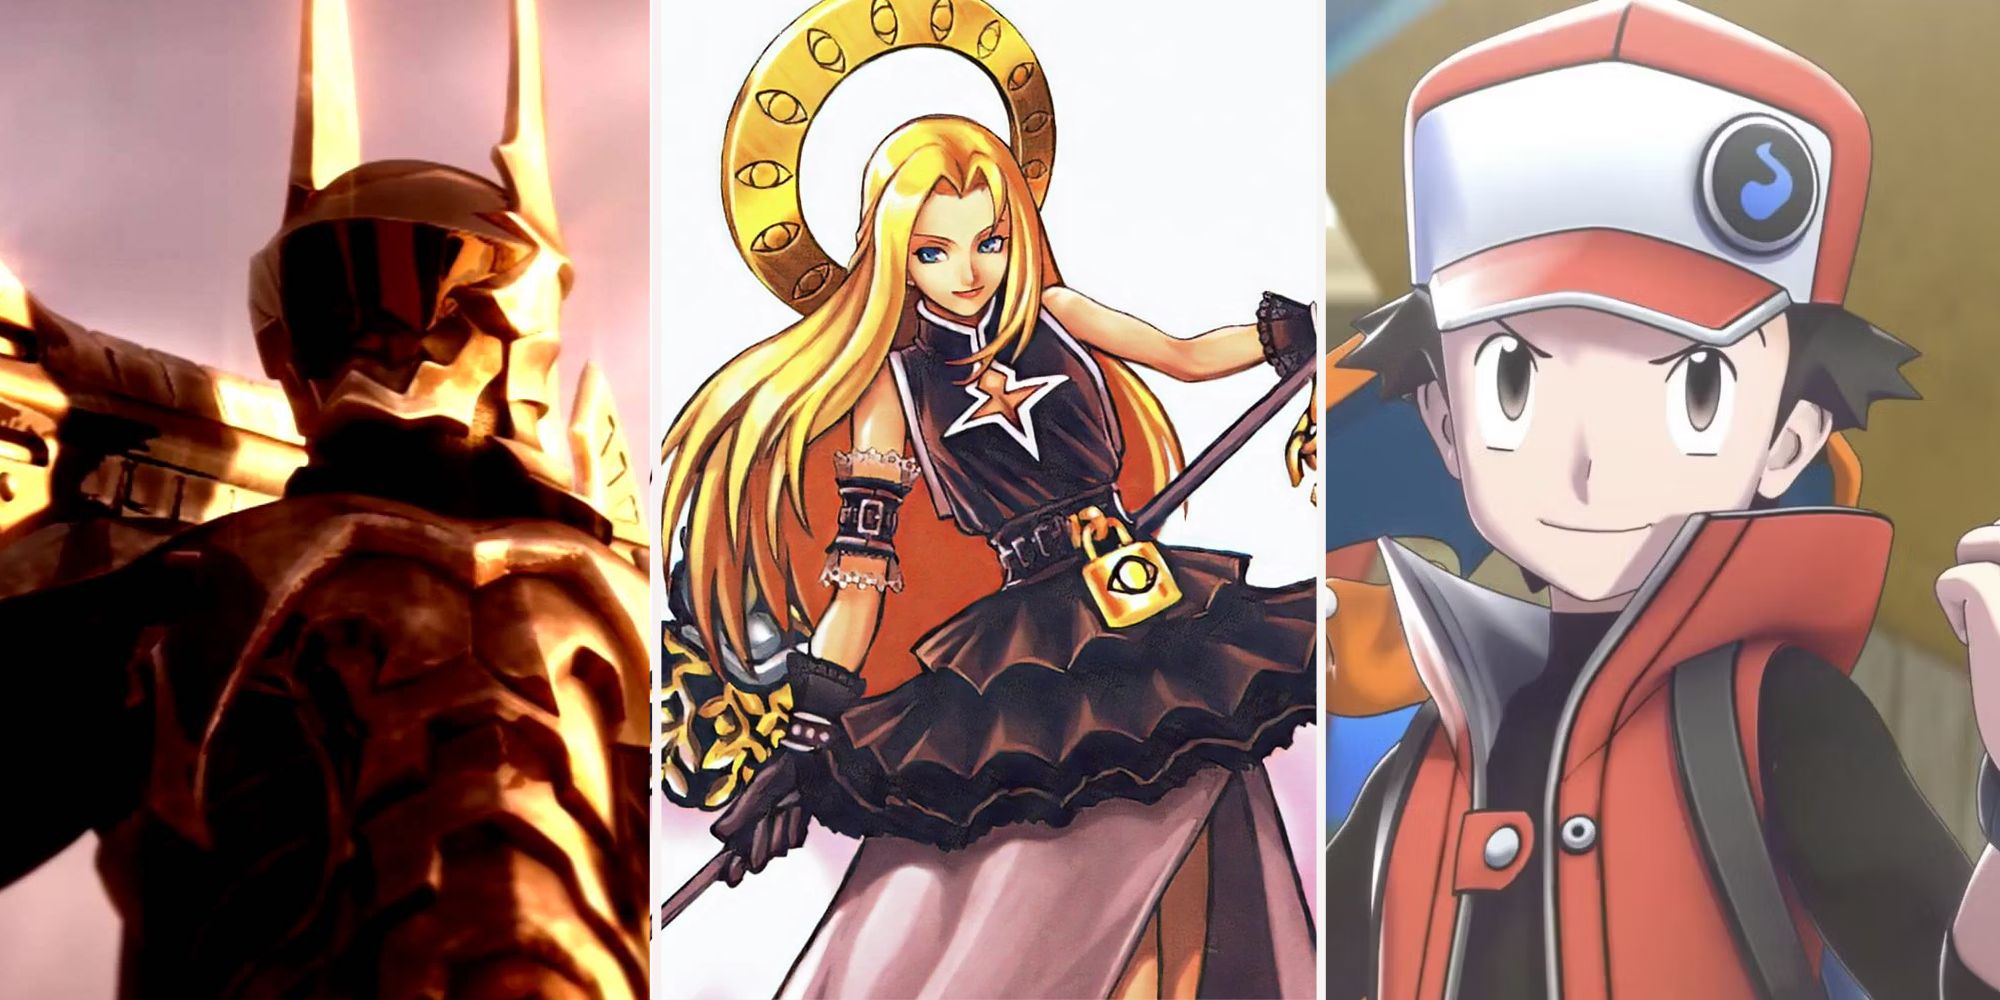 Split images of Lingering Will in Kingdom Hearts 2, Ethereal Queen in Valkyrie Profile, and Red from Pokemon.